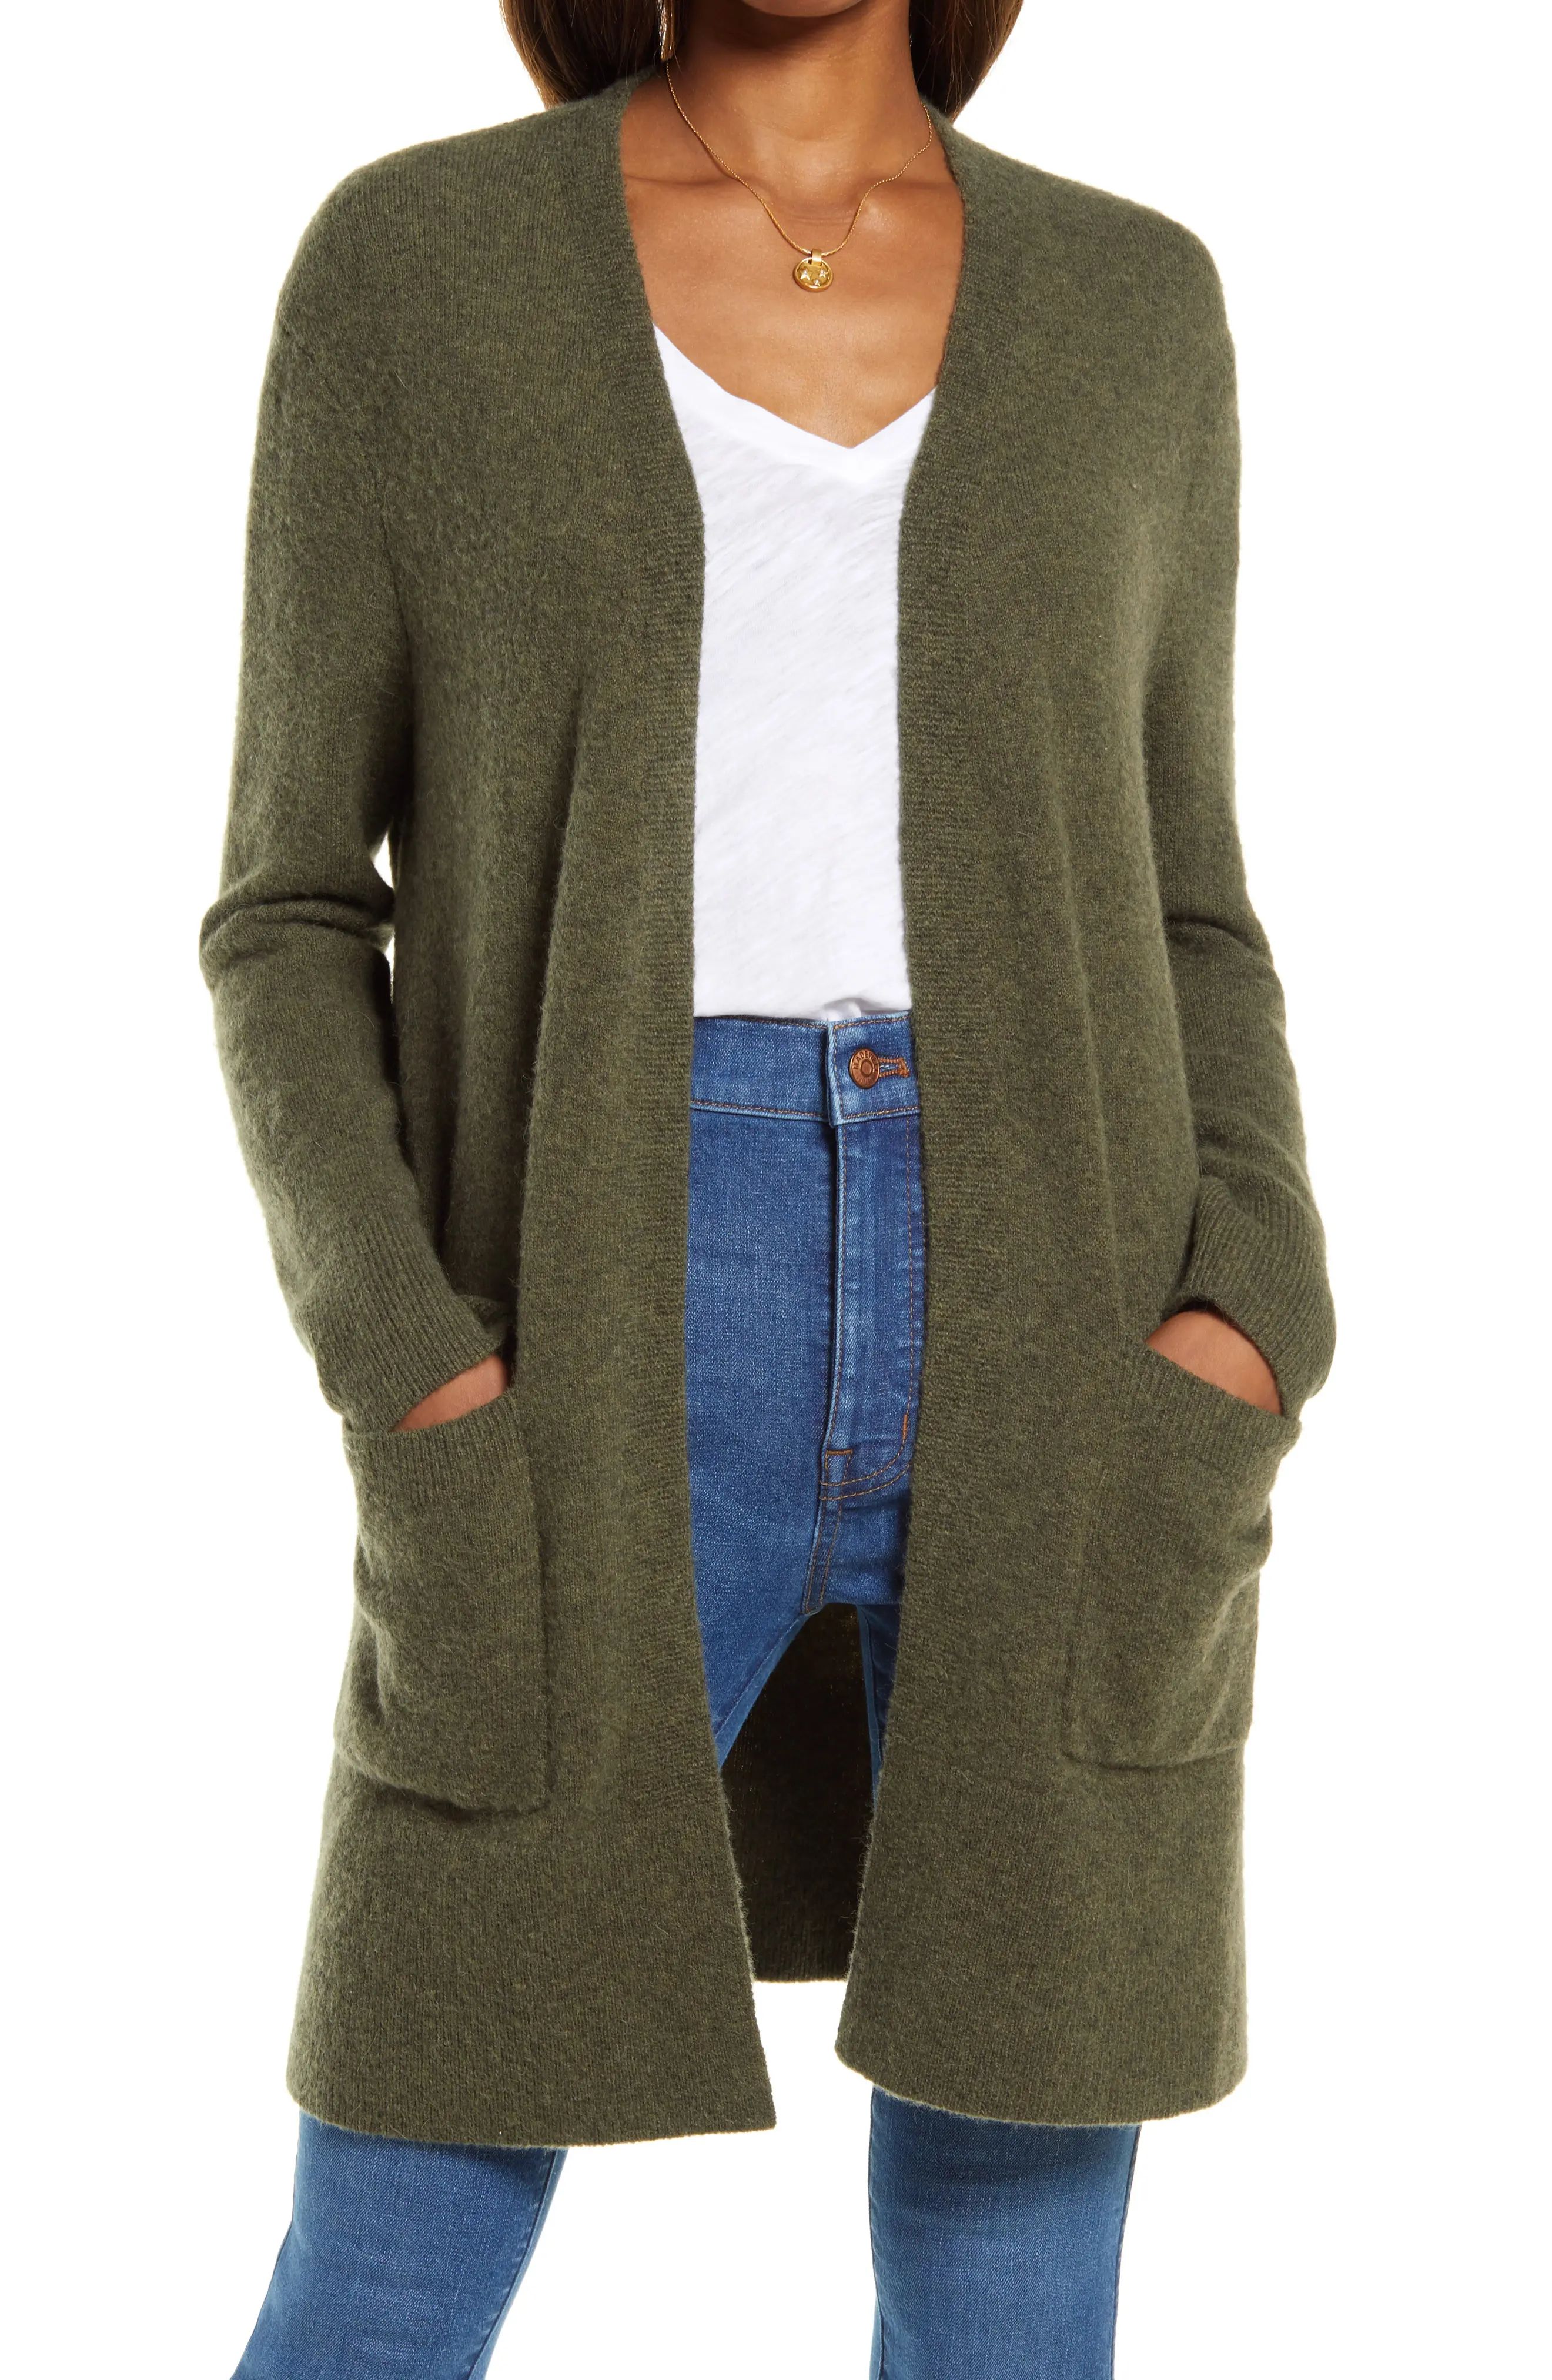 Madewell Kent Cardigan Sweater, Size Large in Heather Foliage at Nordstrom | Nordstrom